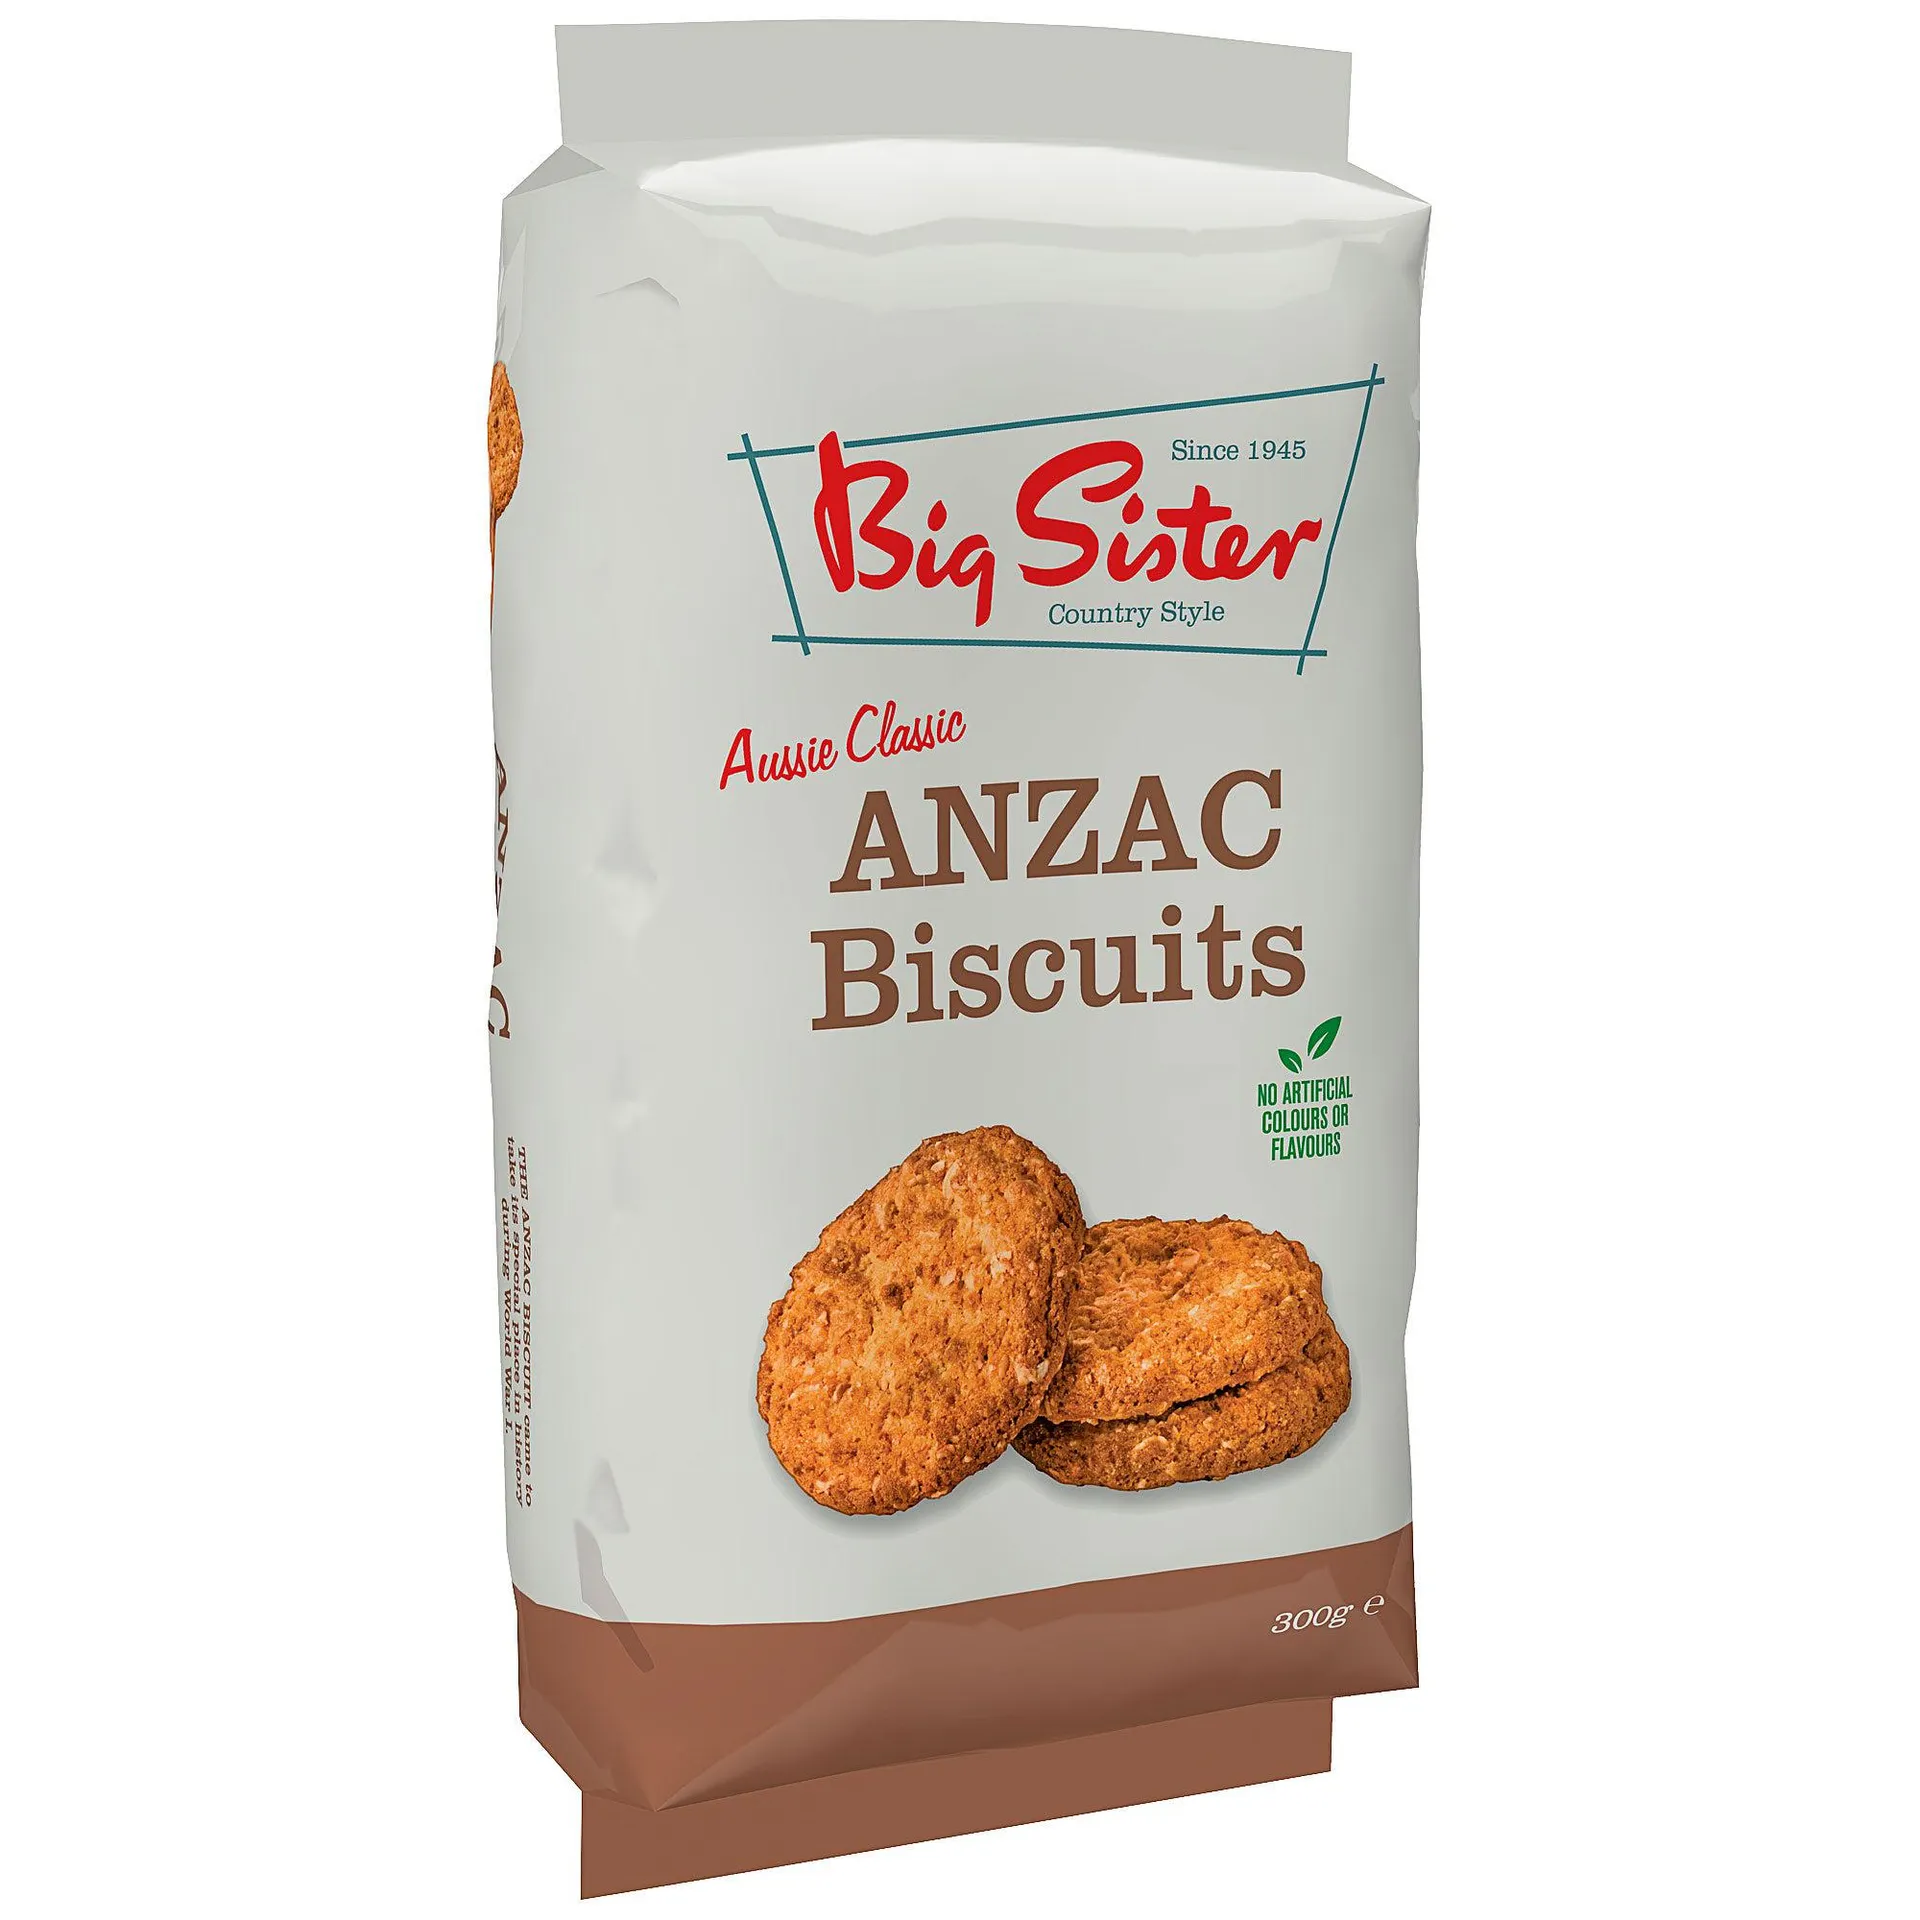 Big Sister ANZAC Biscuits 300g